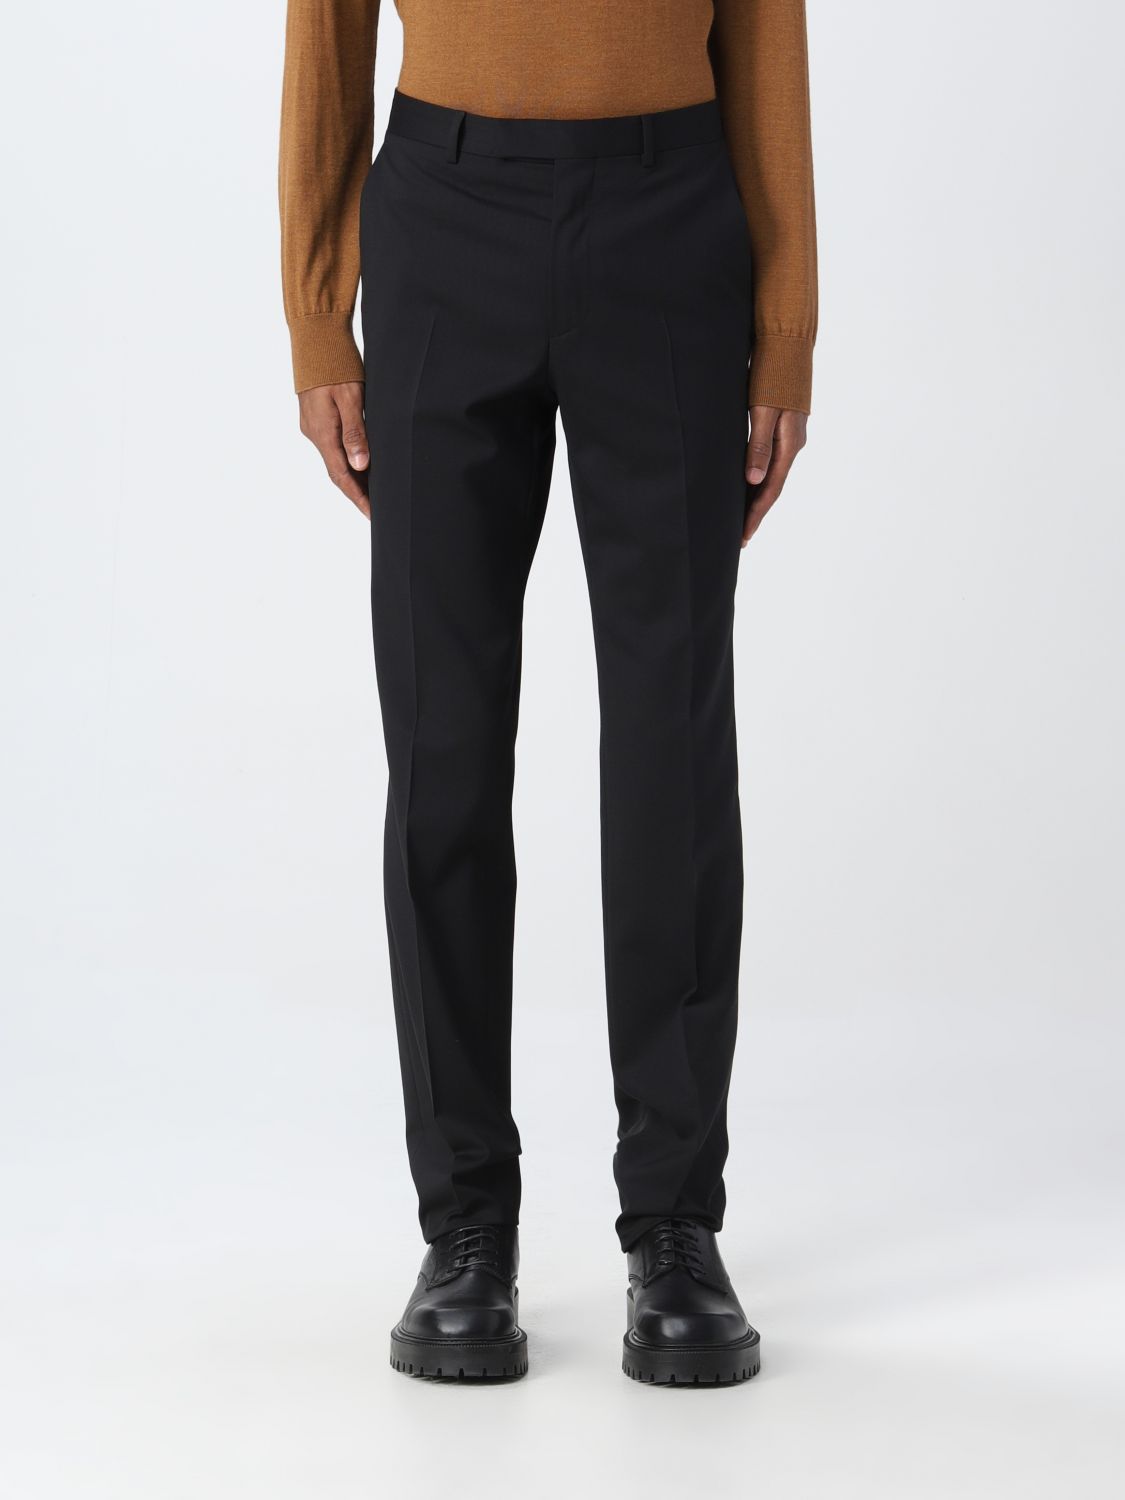 Trousers Zegna: Zegna trousers for men black 1